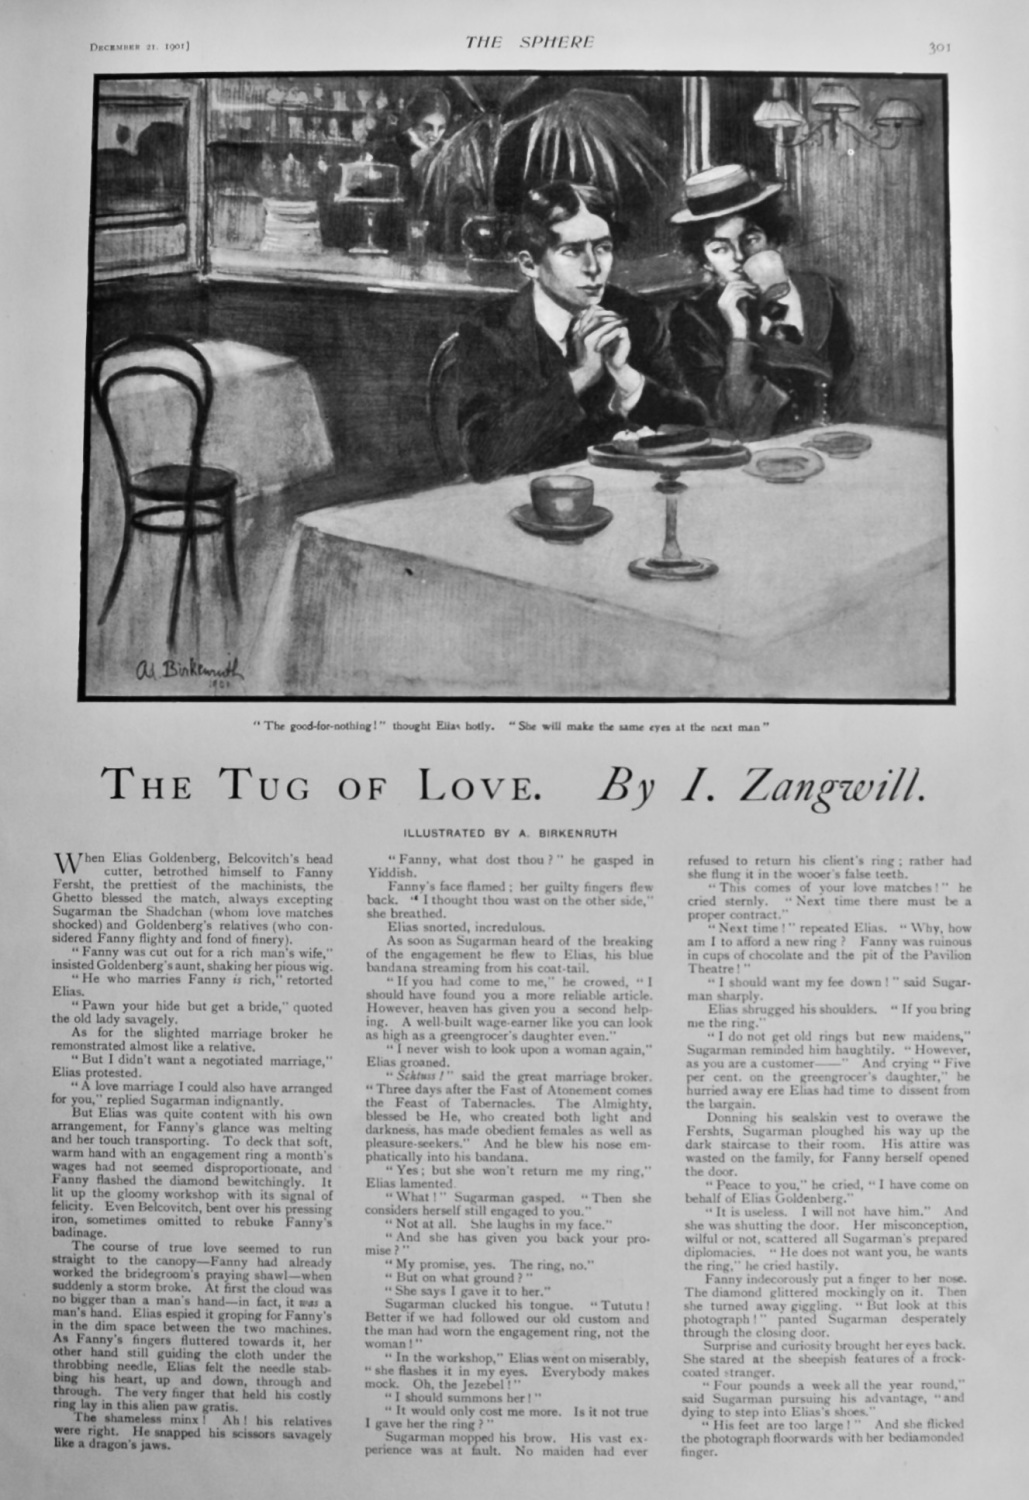 The Tug of Love.  Written by I. Zangwill.  1901.